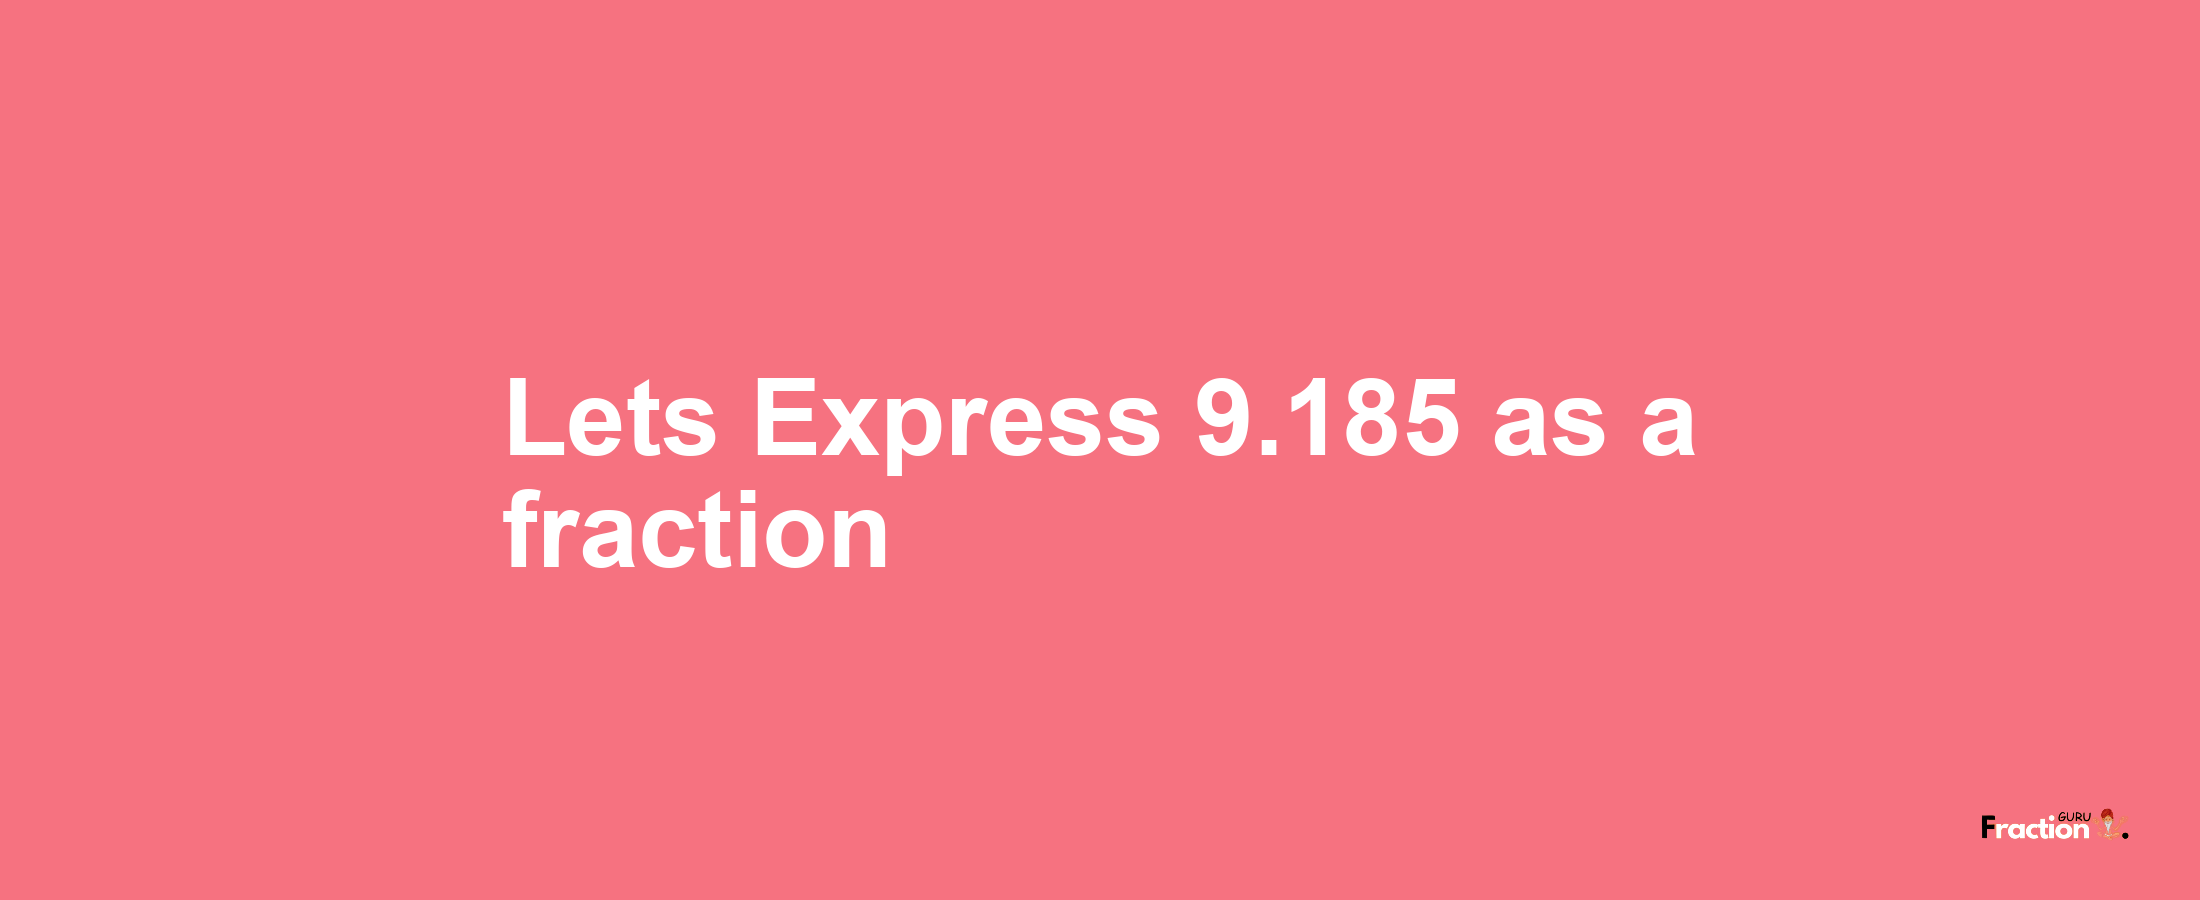 Lets Express 9.185 as afraction